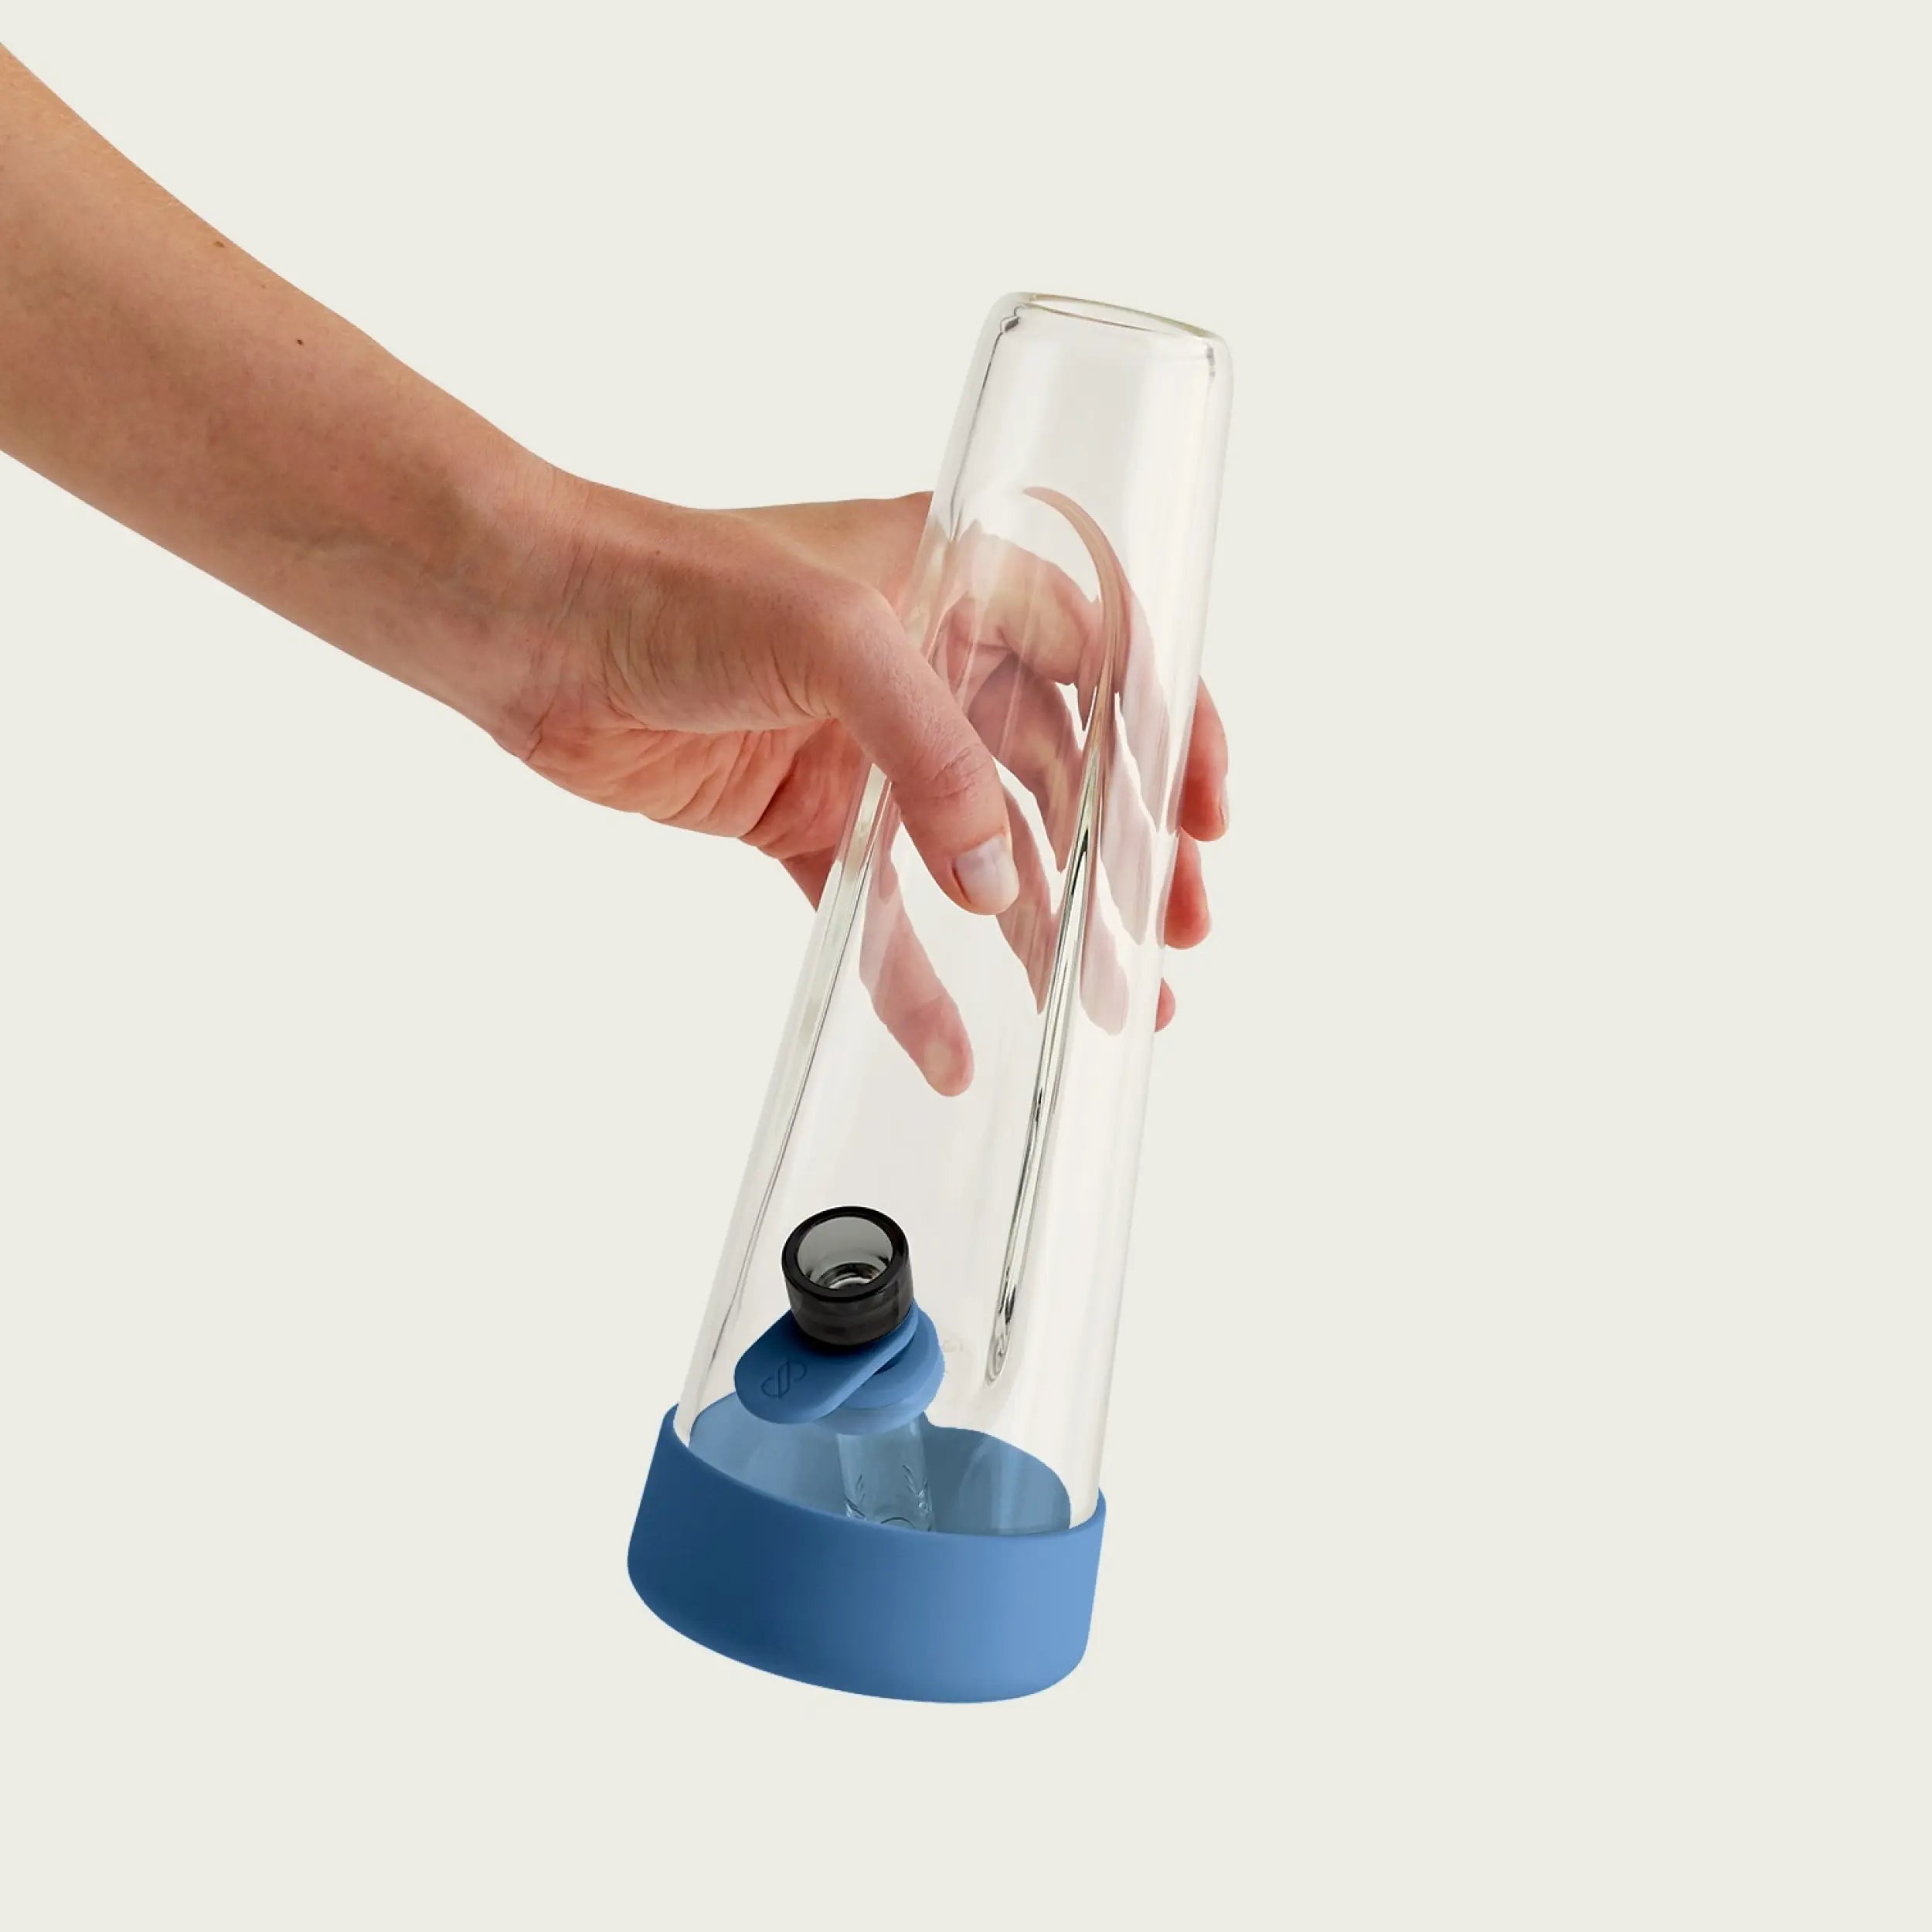 Session's Indigo Blue Bong: Elevate Your Smoking Experience.